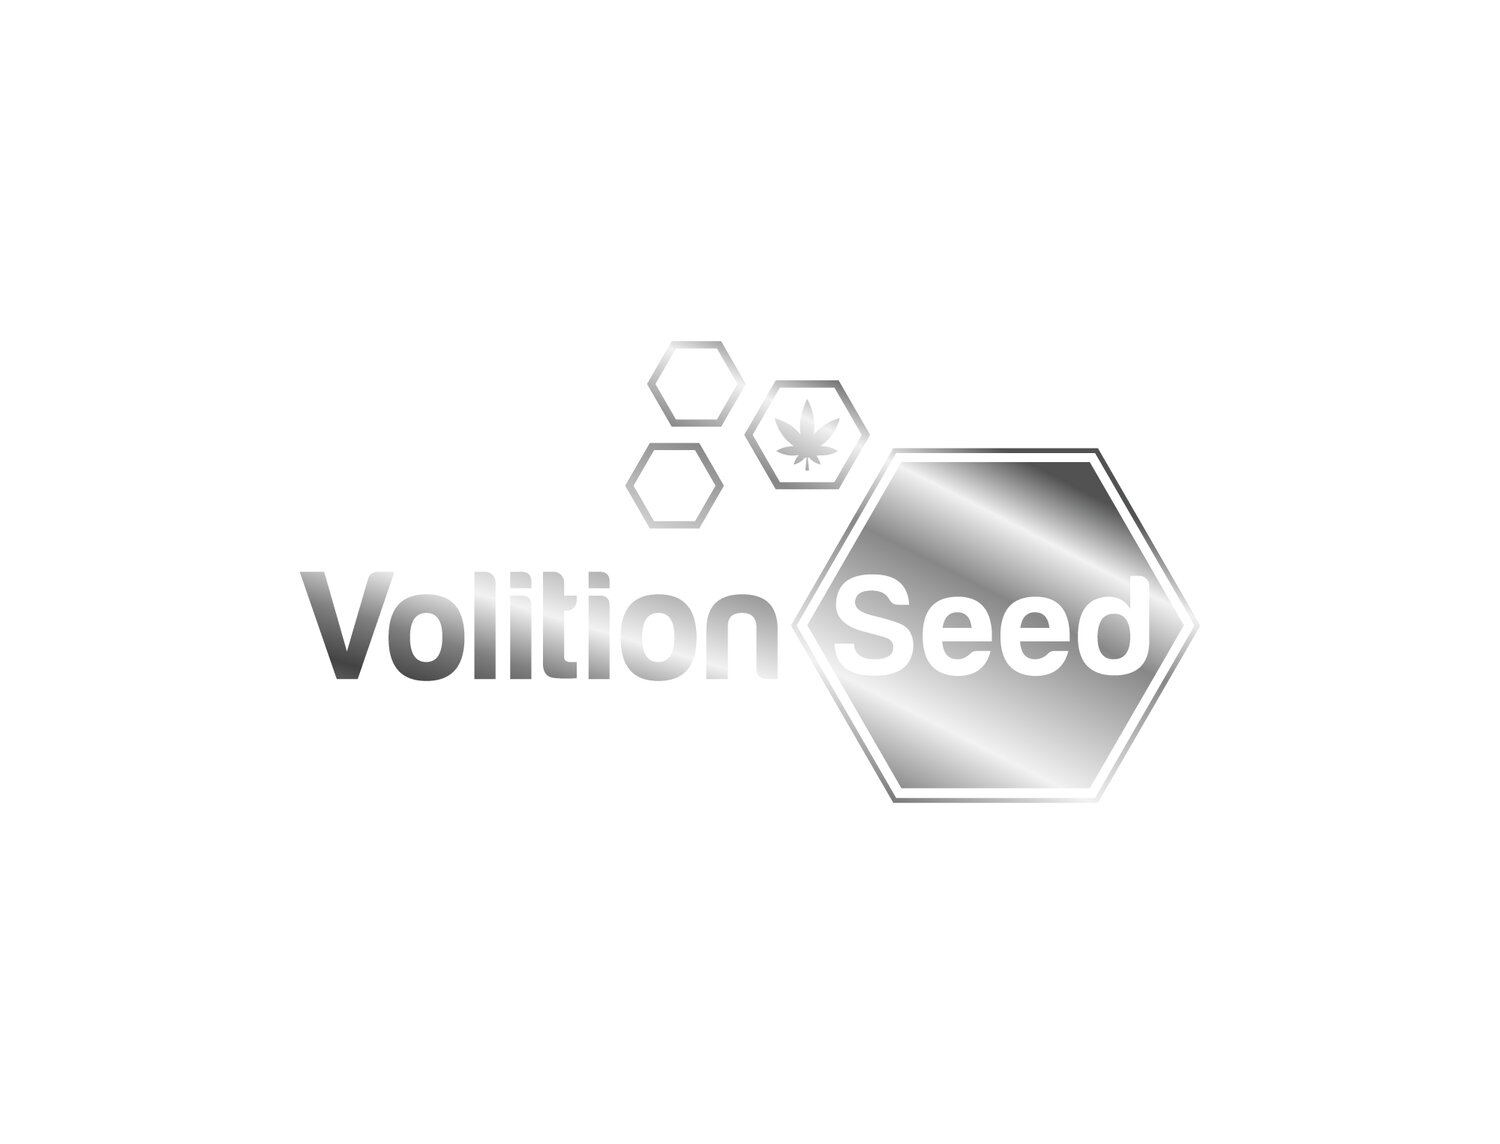 Volition Seed